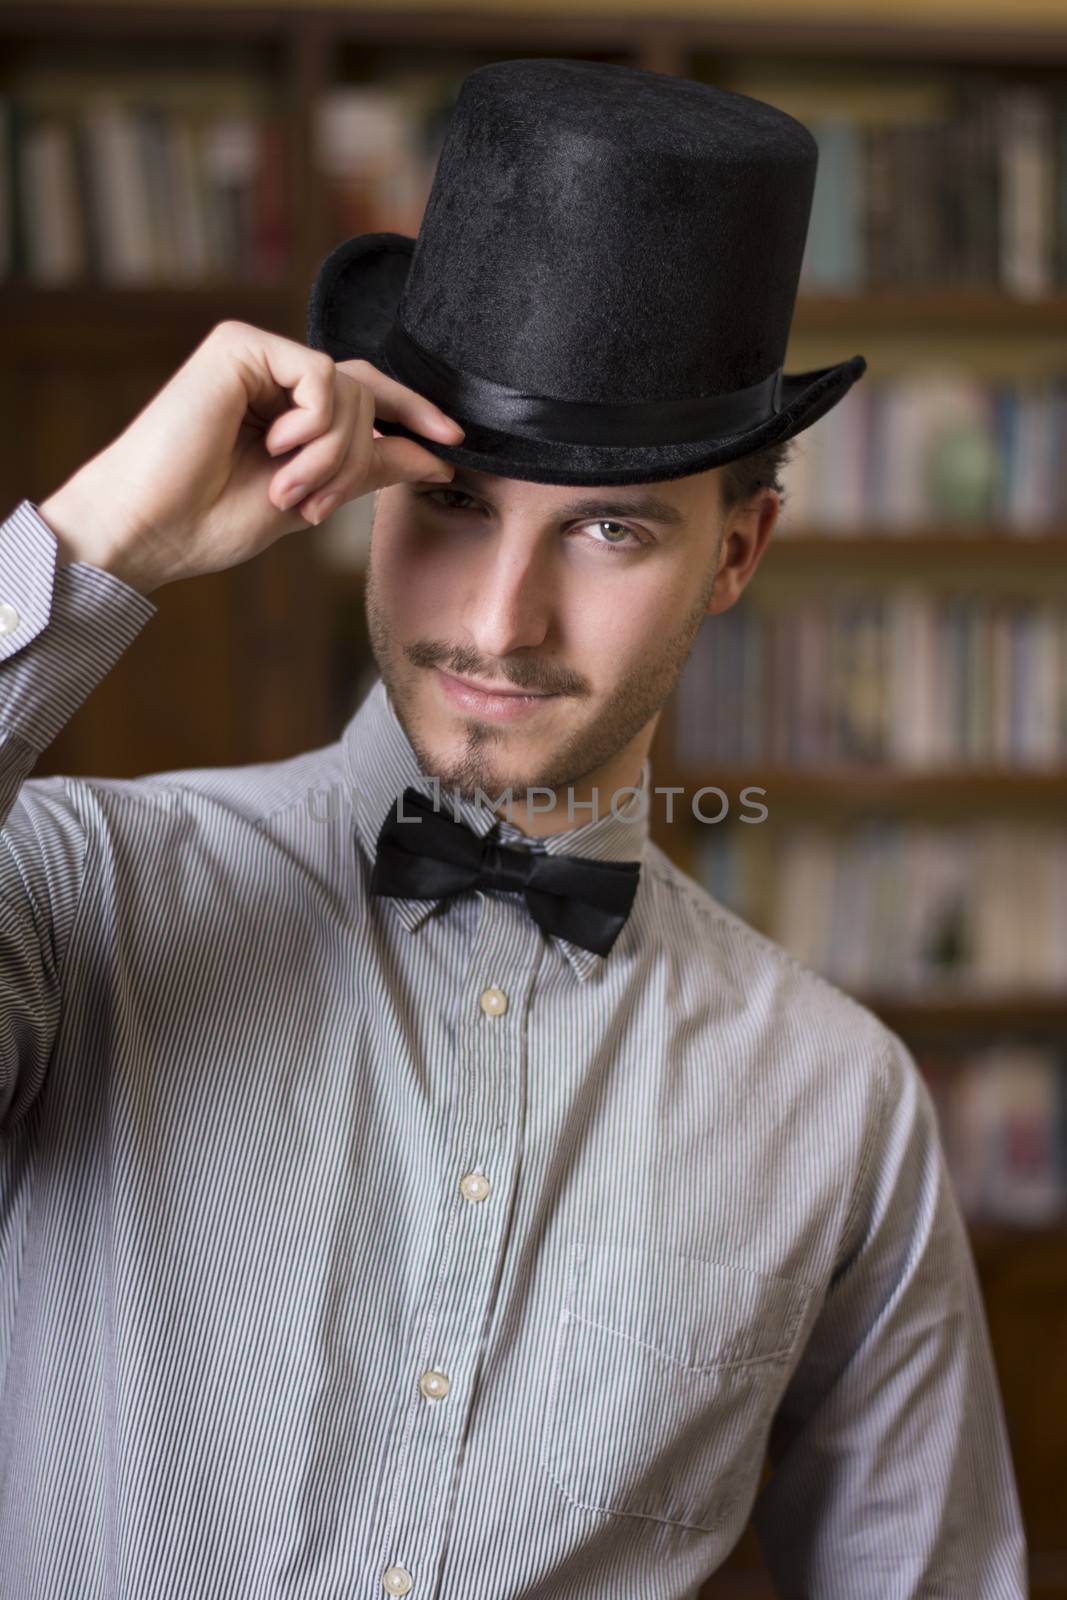 Attractive young man wearing top hat and bow tie by artofphoto